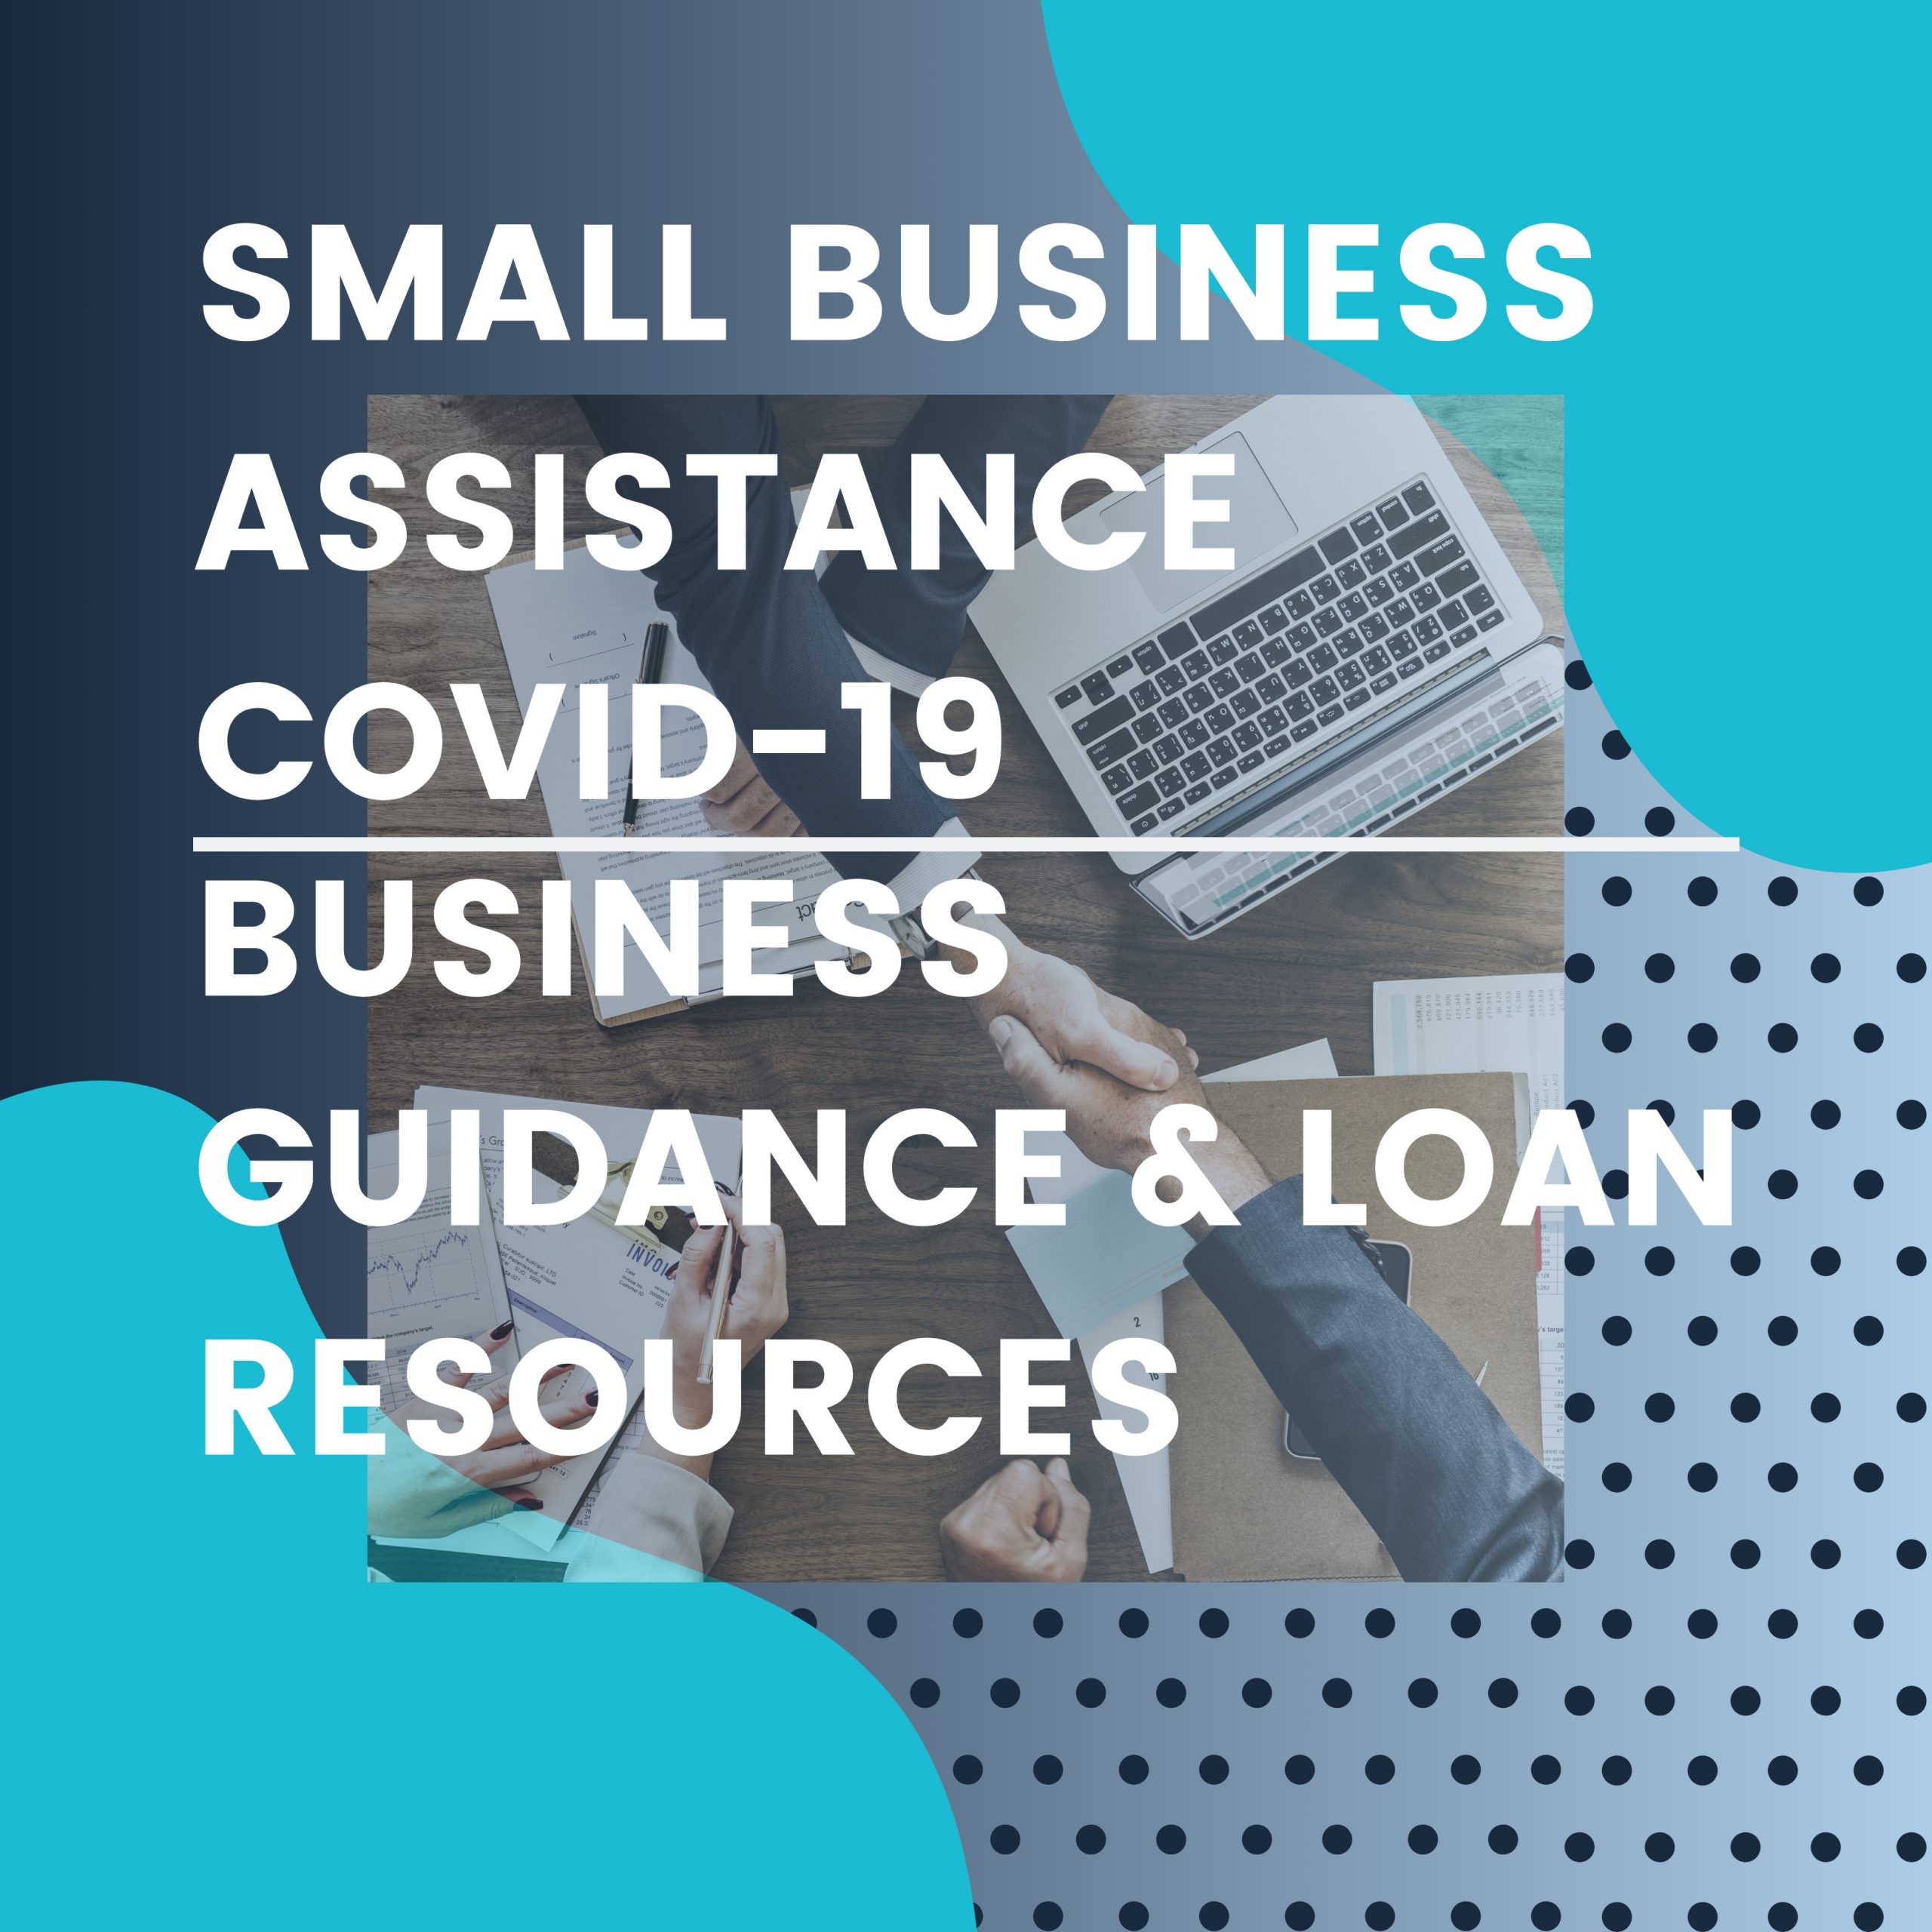 small business administration